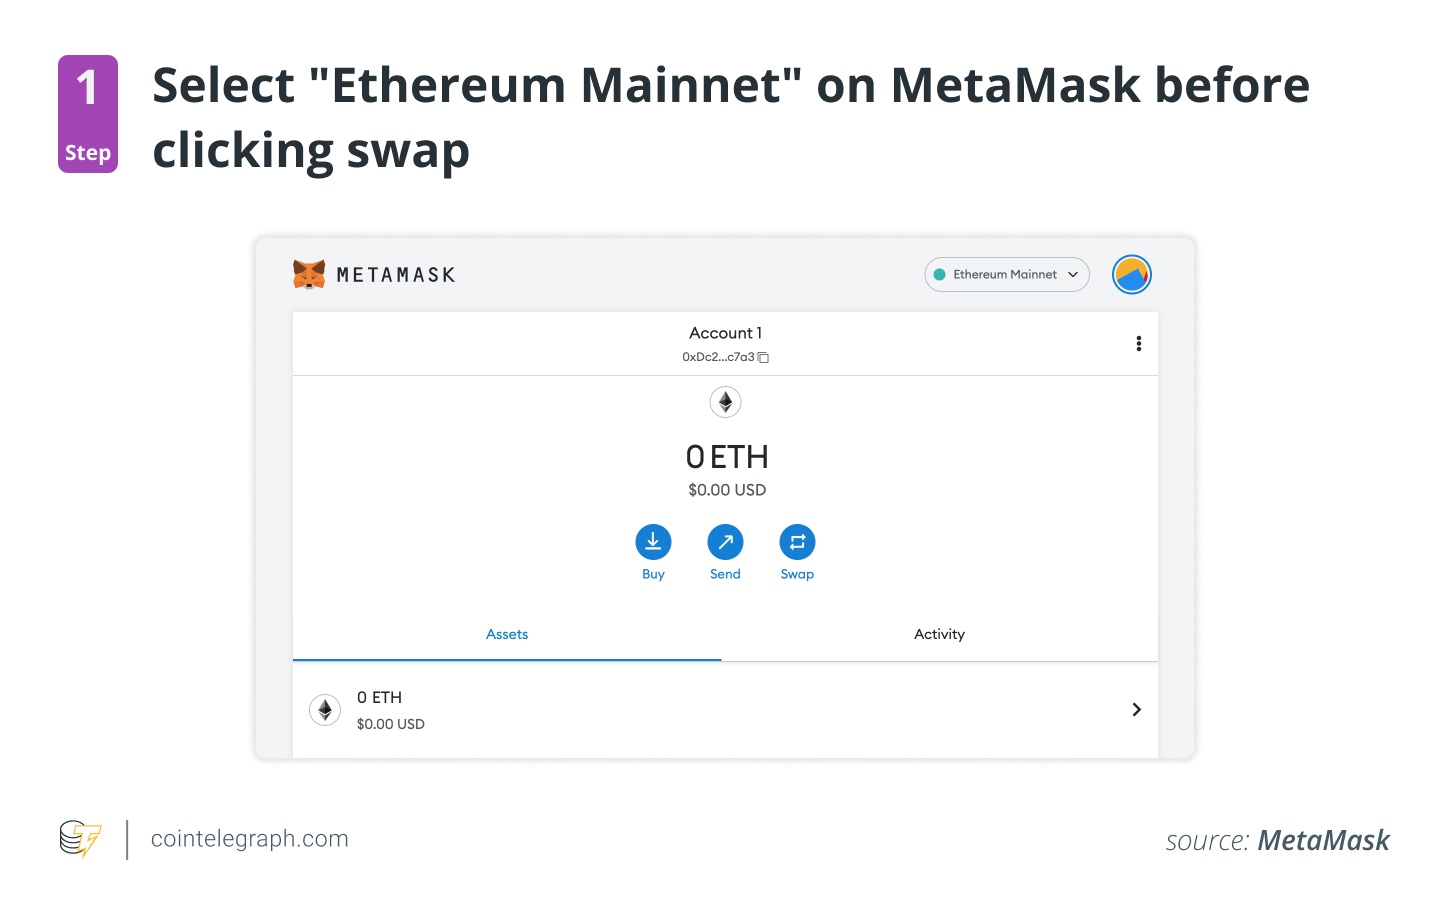 Step 1: Select "Ethereum Mainnet" on MetaMask before clicking swap